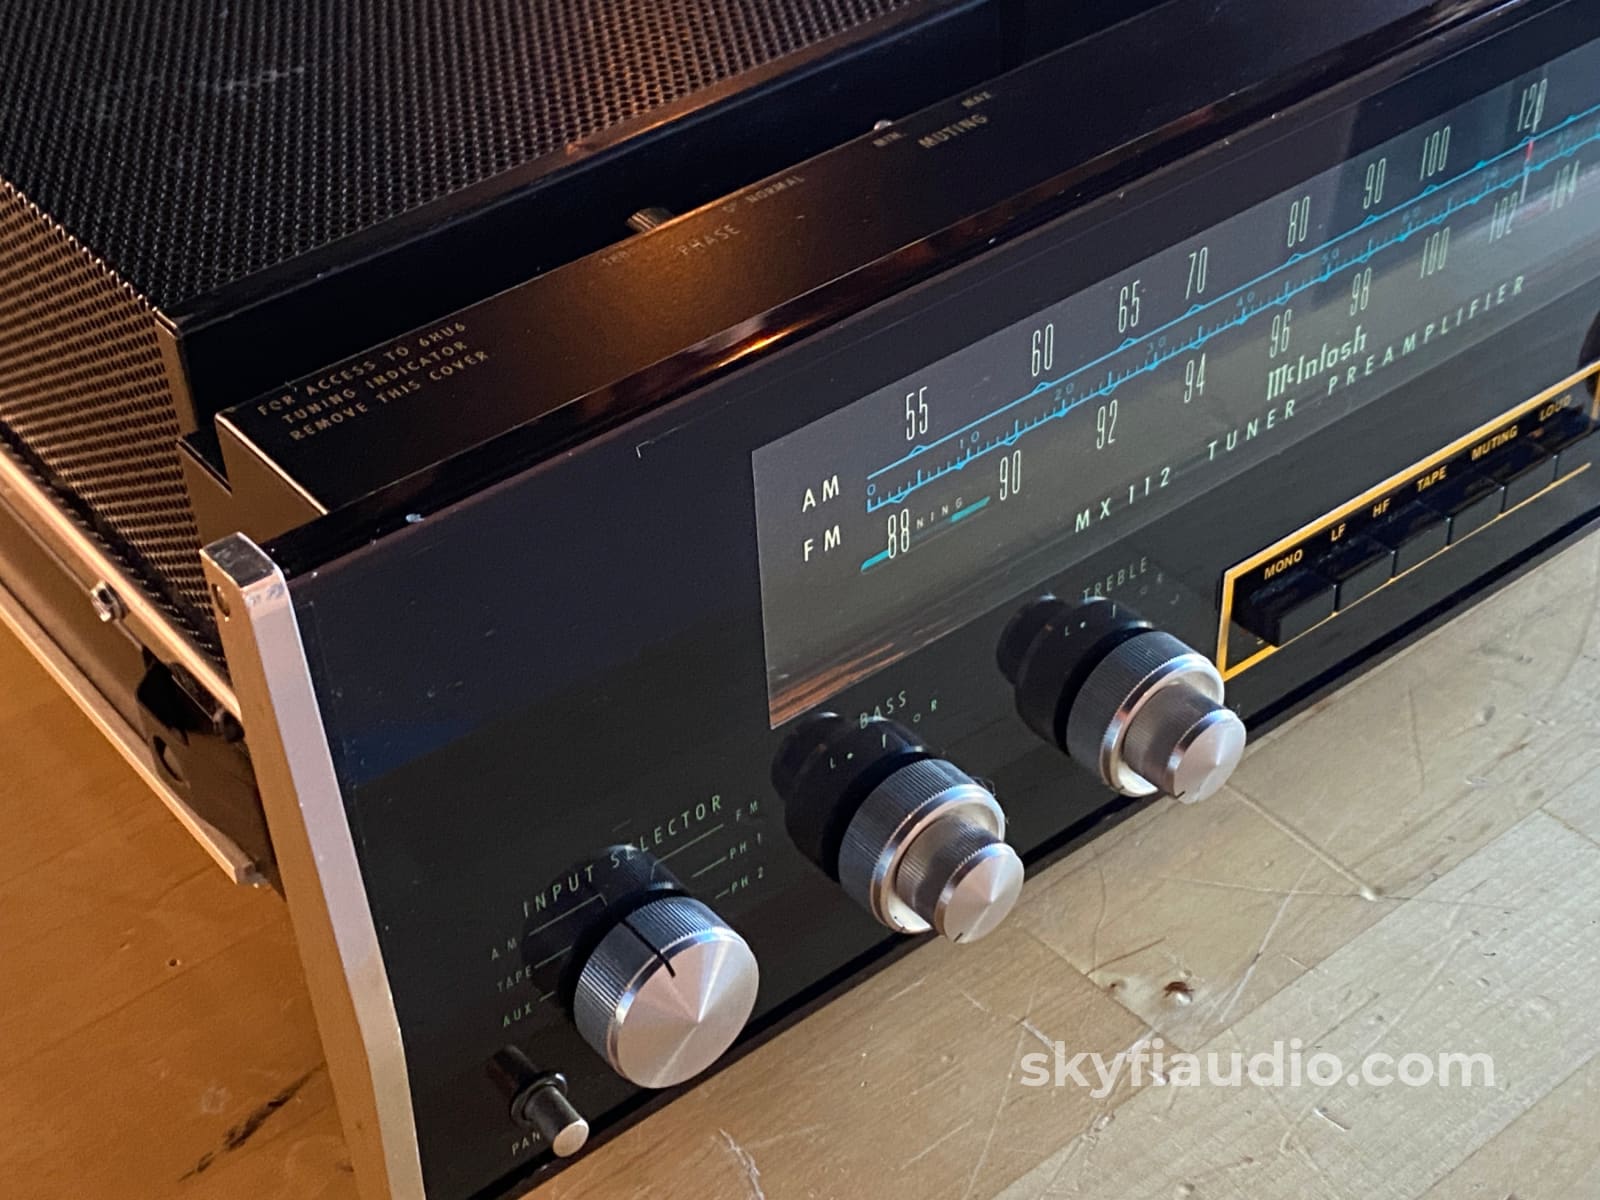 Mcintosh Mx112 Vintage Preamp From Abkco Music & Records - The Rolling Stones And More! Integrated